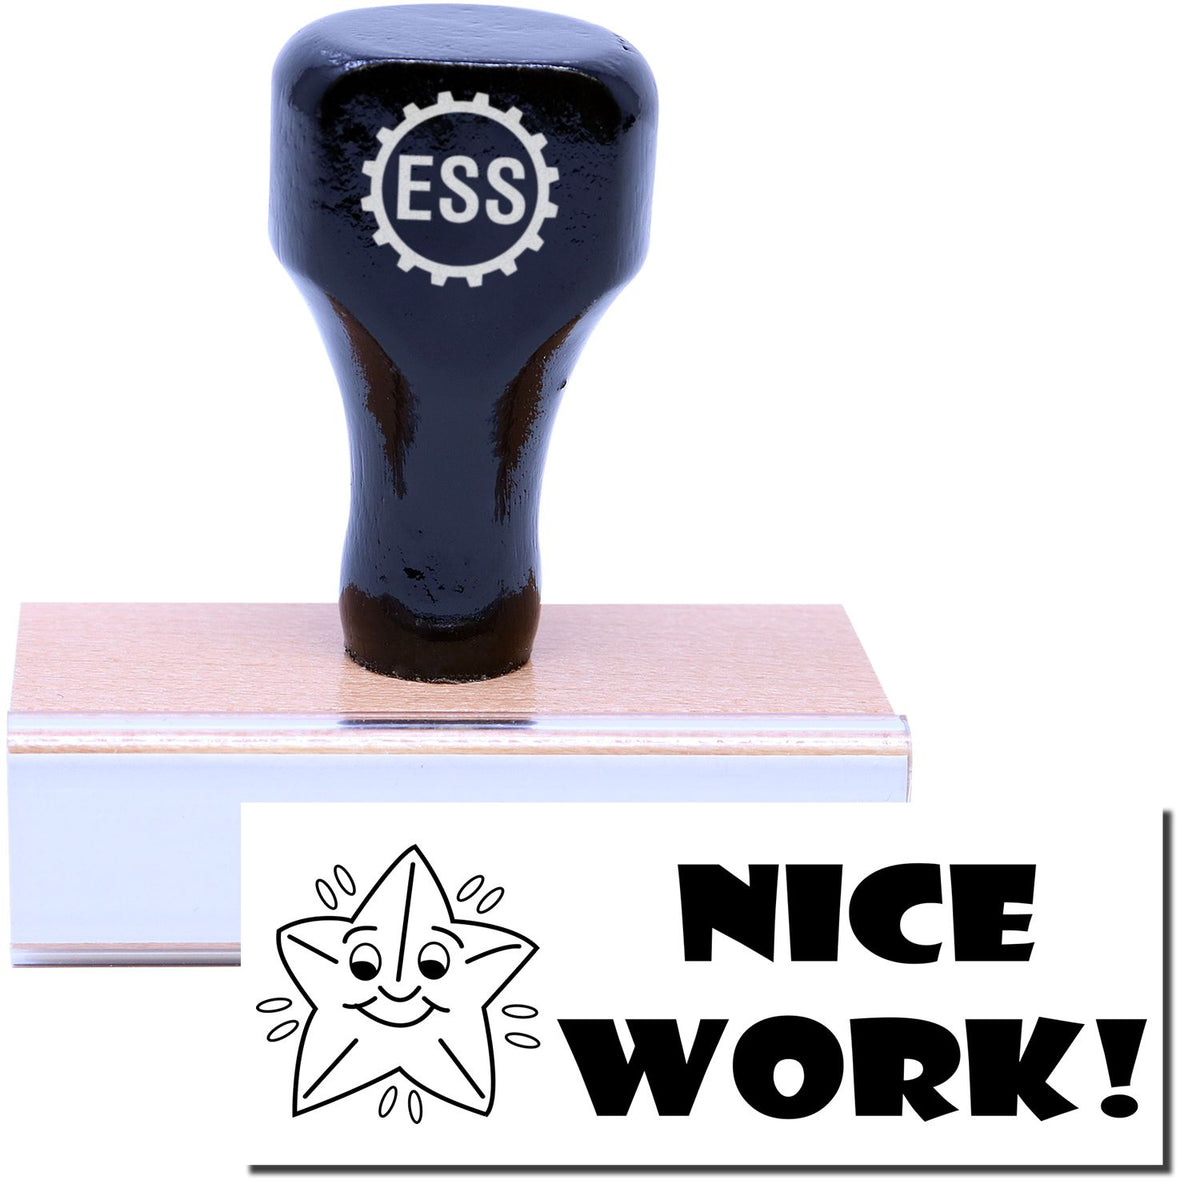 A stock office rubber stamp with a stamped image showing how the text &quot;NICE WORK!&quot; in a large bold font with an image of a smiling starfish on the left side is displayed after stamping.